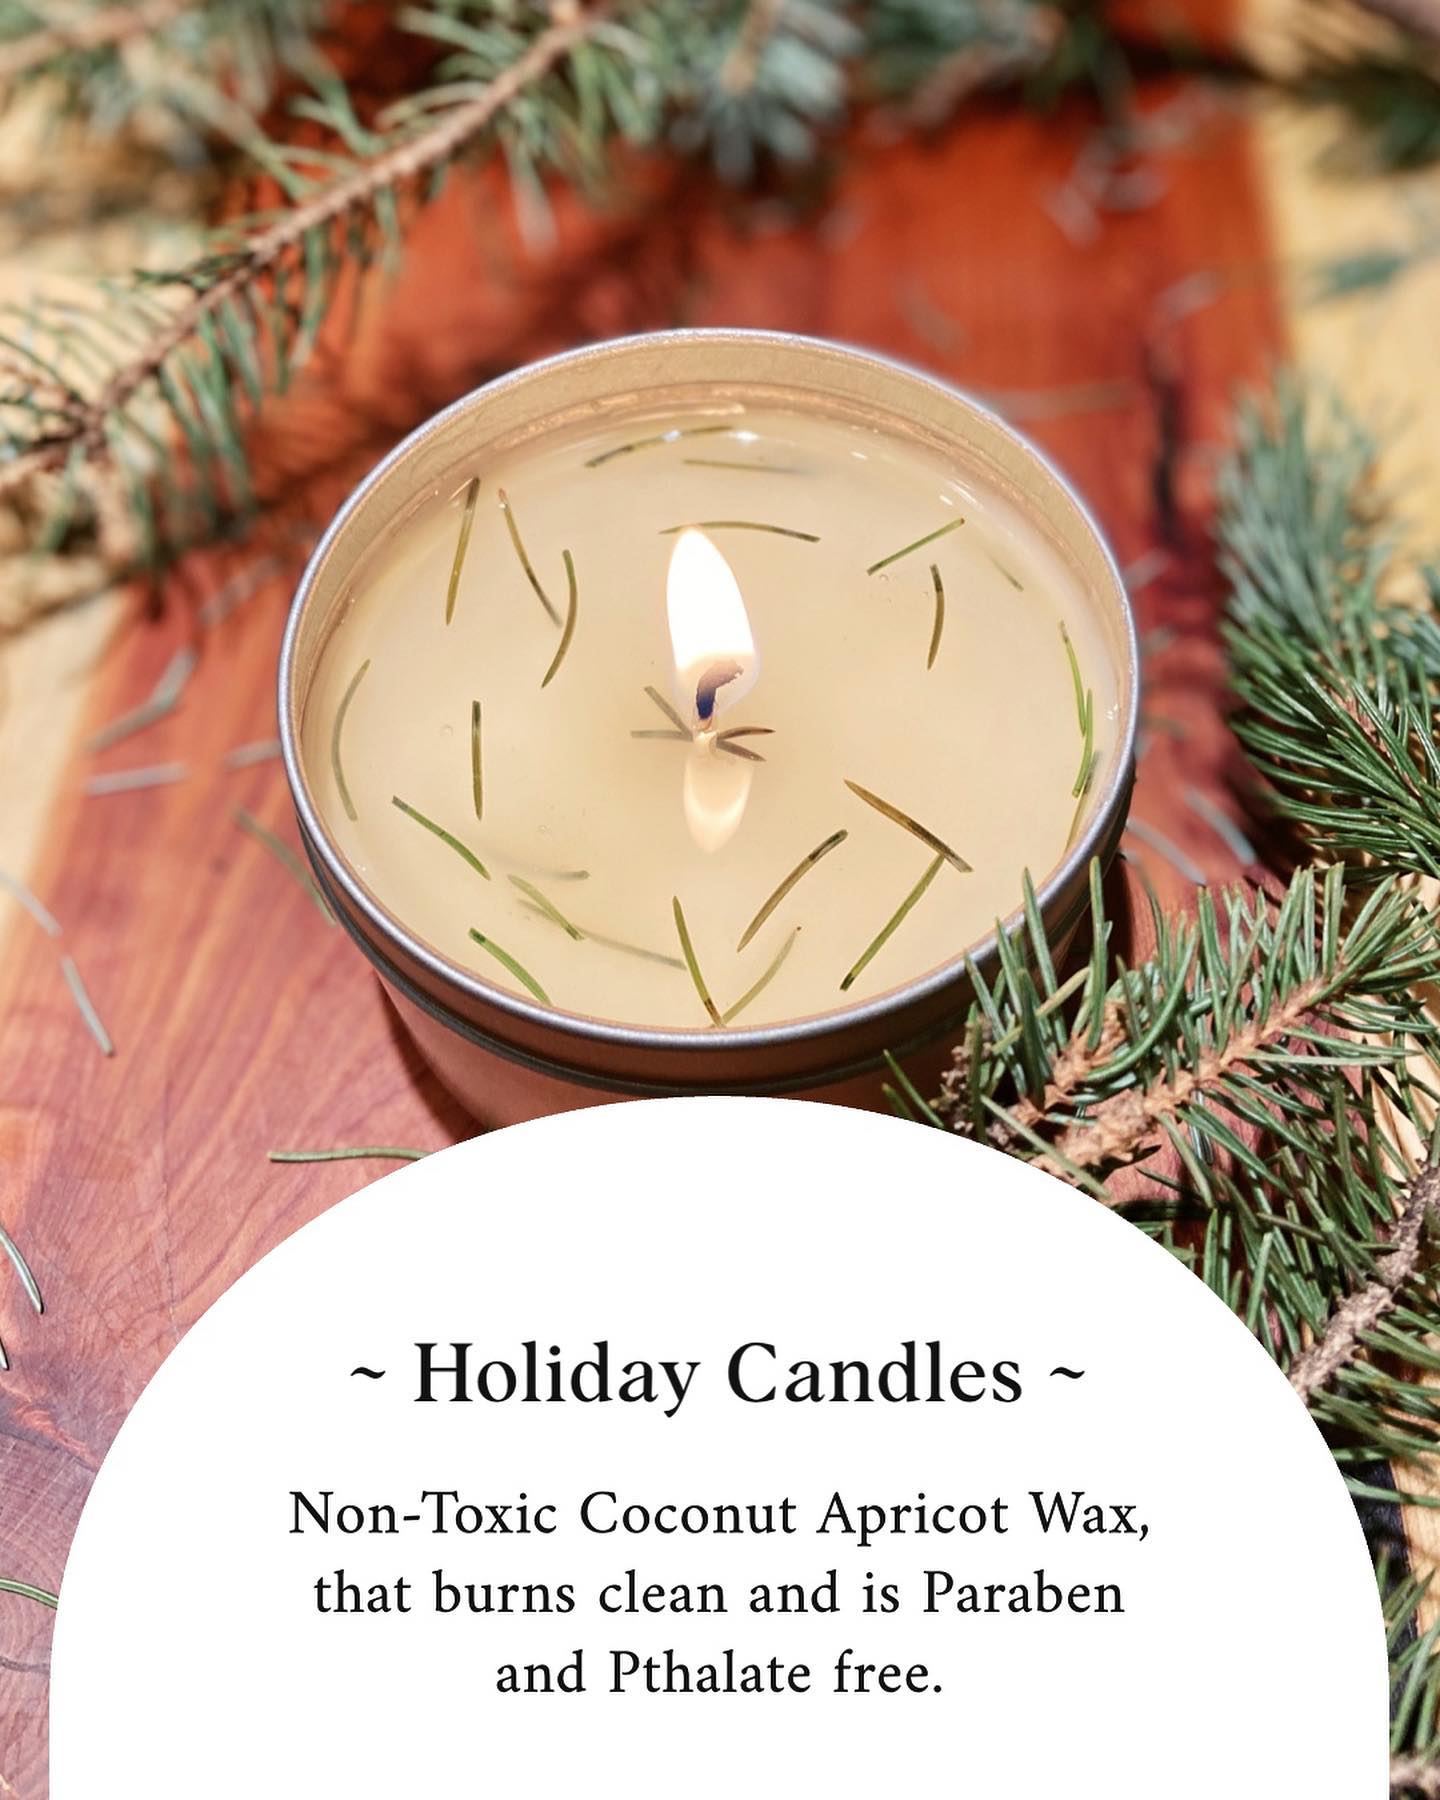 Holiday candles are here! 🌲☃️🎁
We have four festive scents that come with or without locally harvested pine needles. The